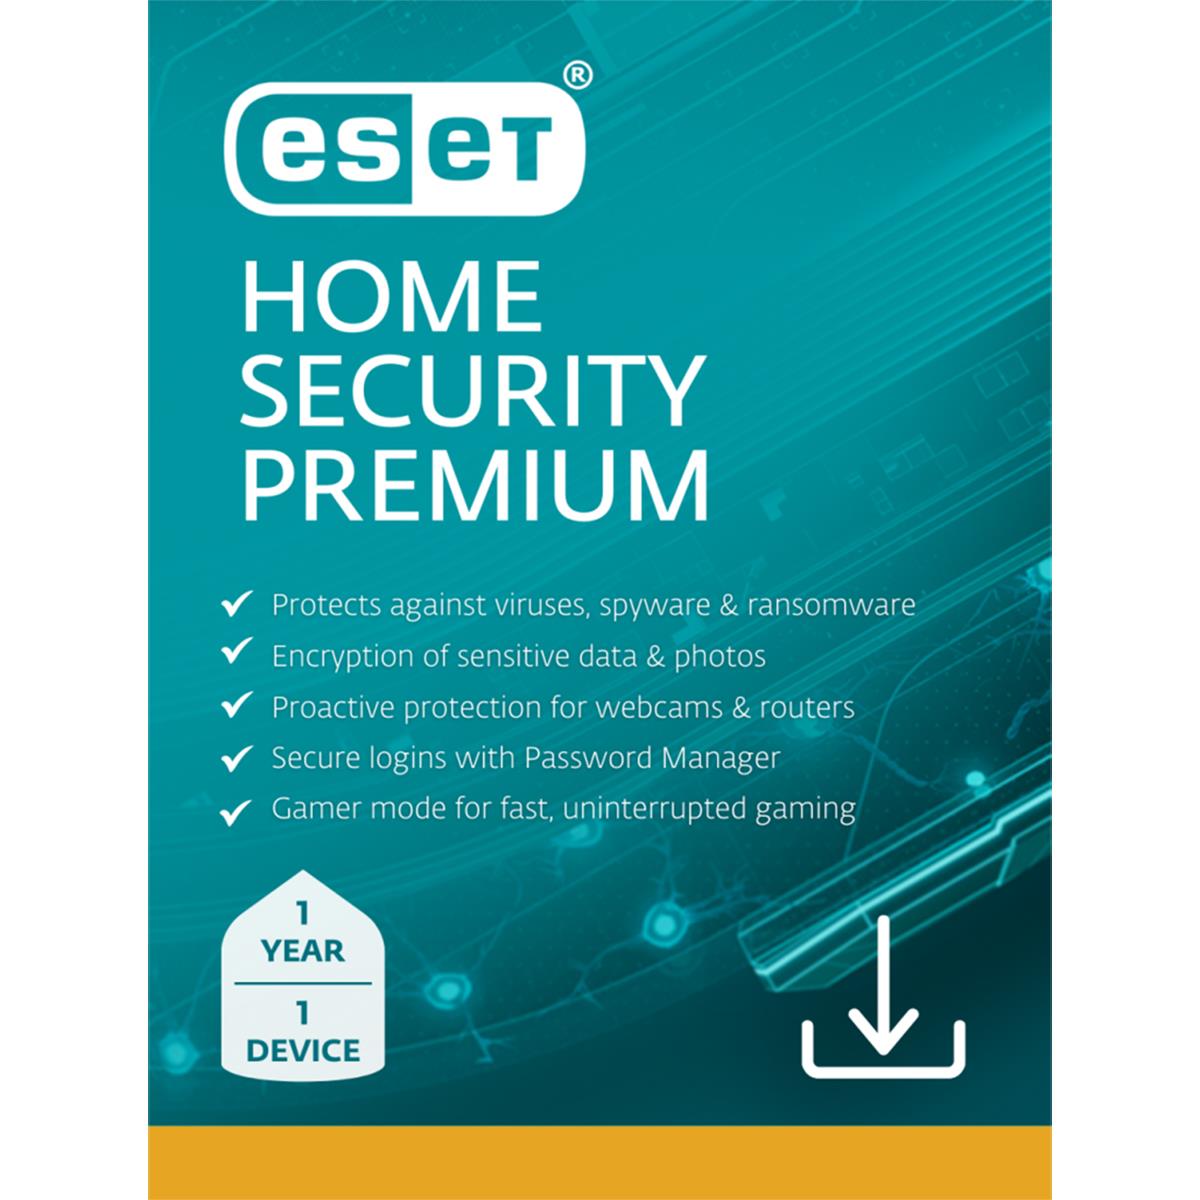 Image of ESET Premium 1 Year Home Security 1 Device